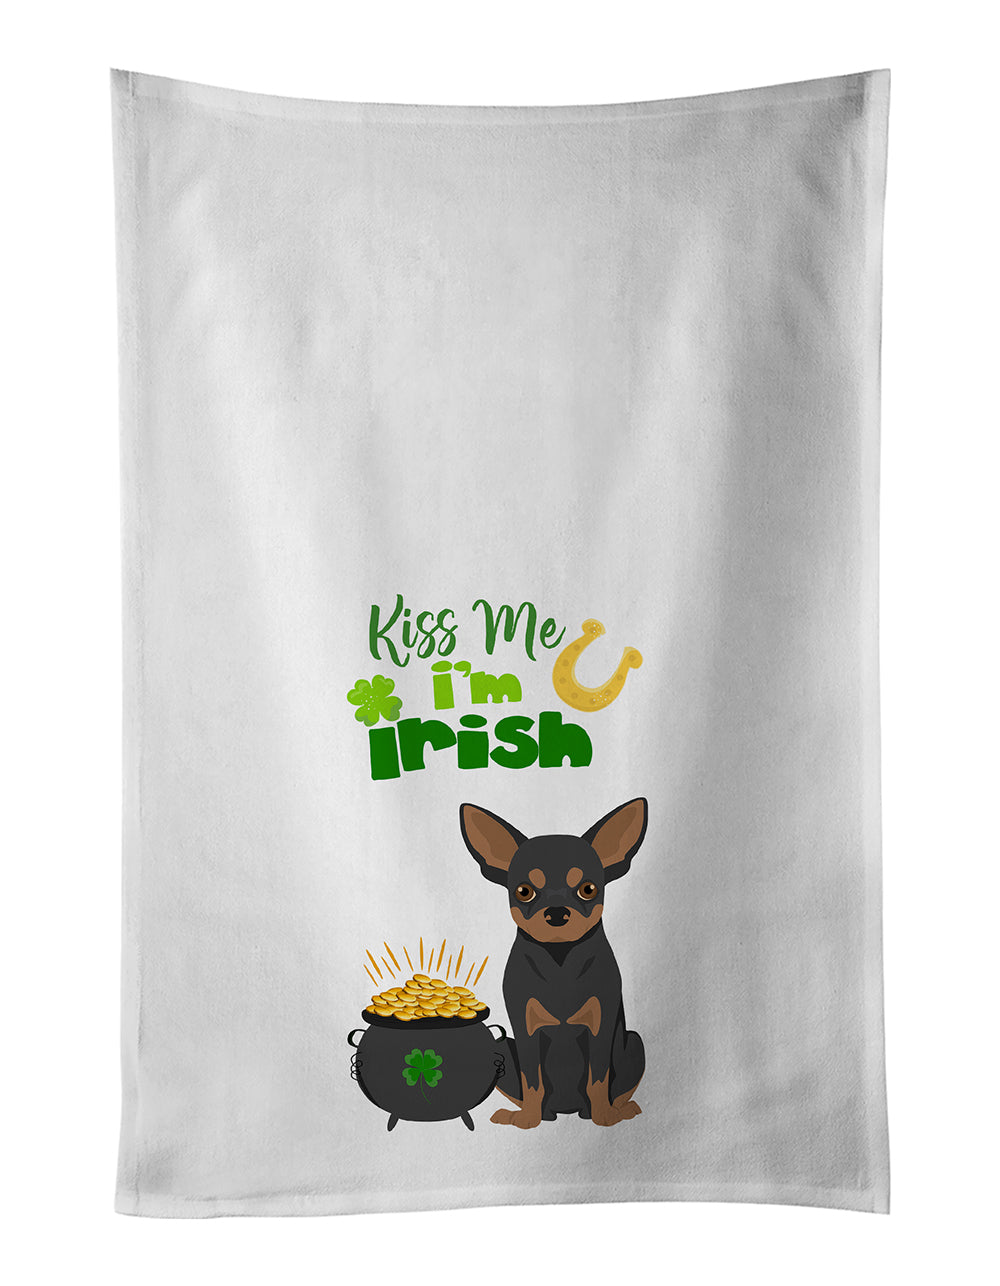 Buy this Black and Tan Chihuahua St. Patrick's Day White Kitchen Towel Set of 2 Dish Towels